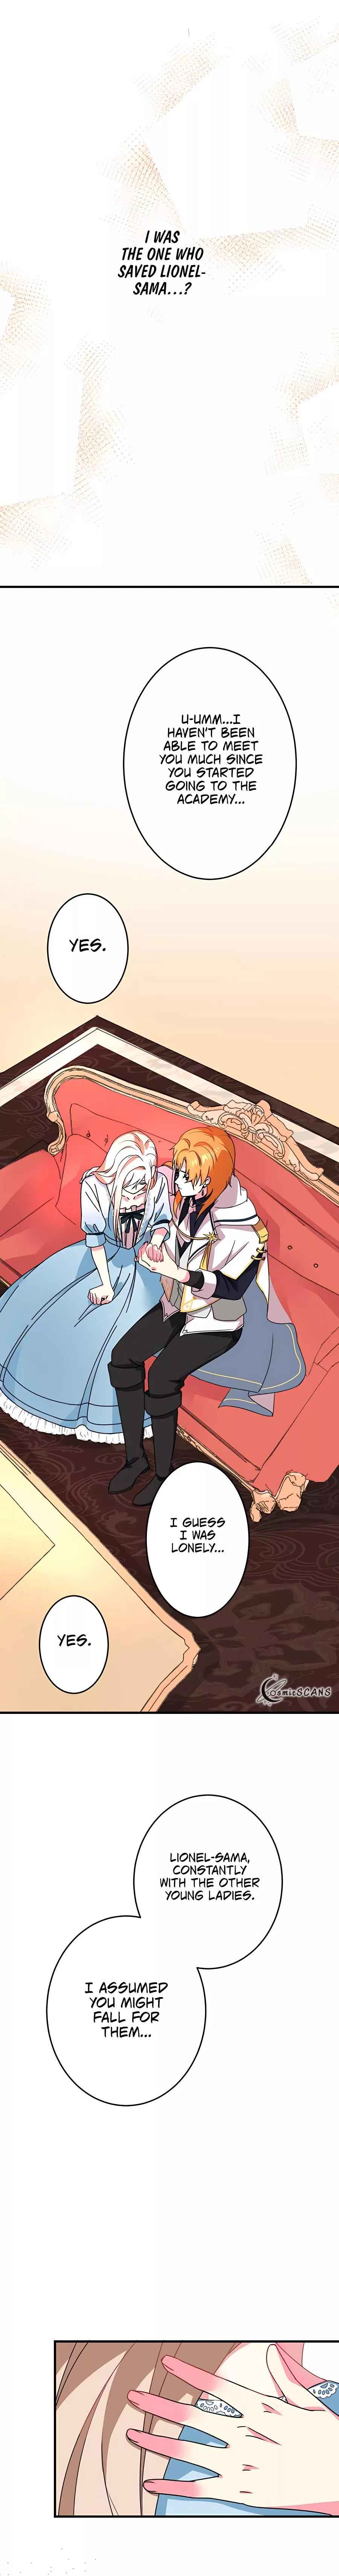 Even though I become a side character, I’m being adored by an overprotective duke chapter 6